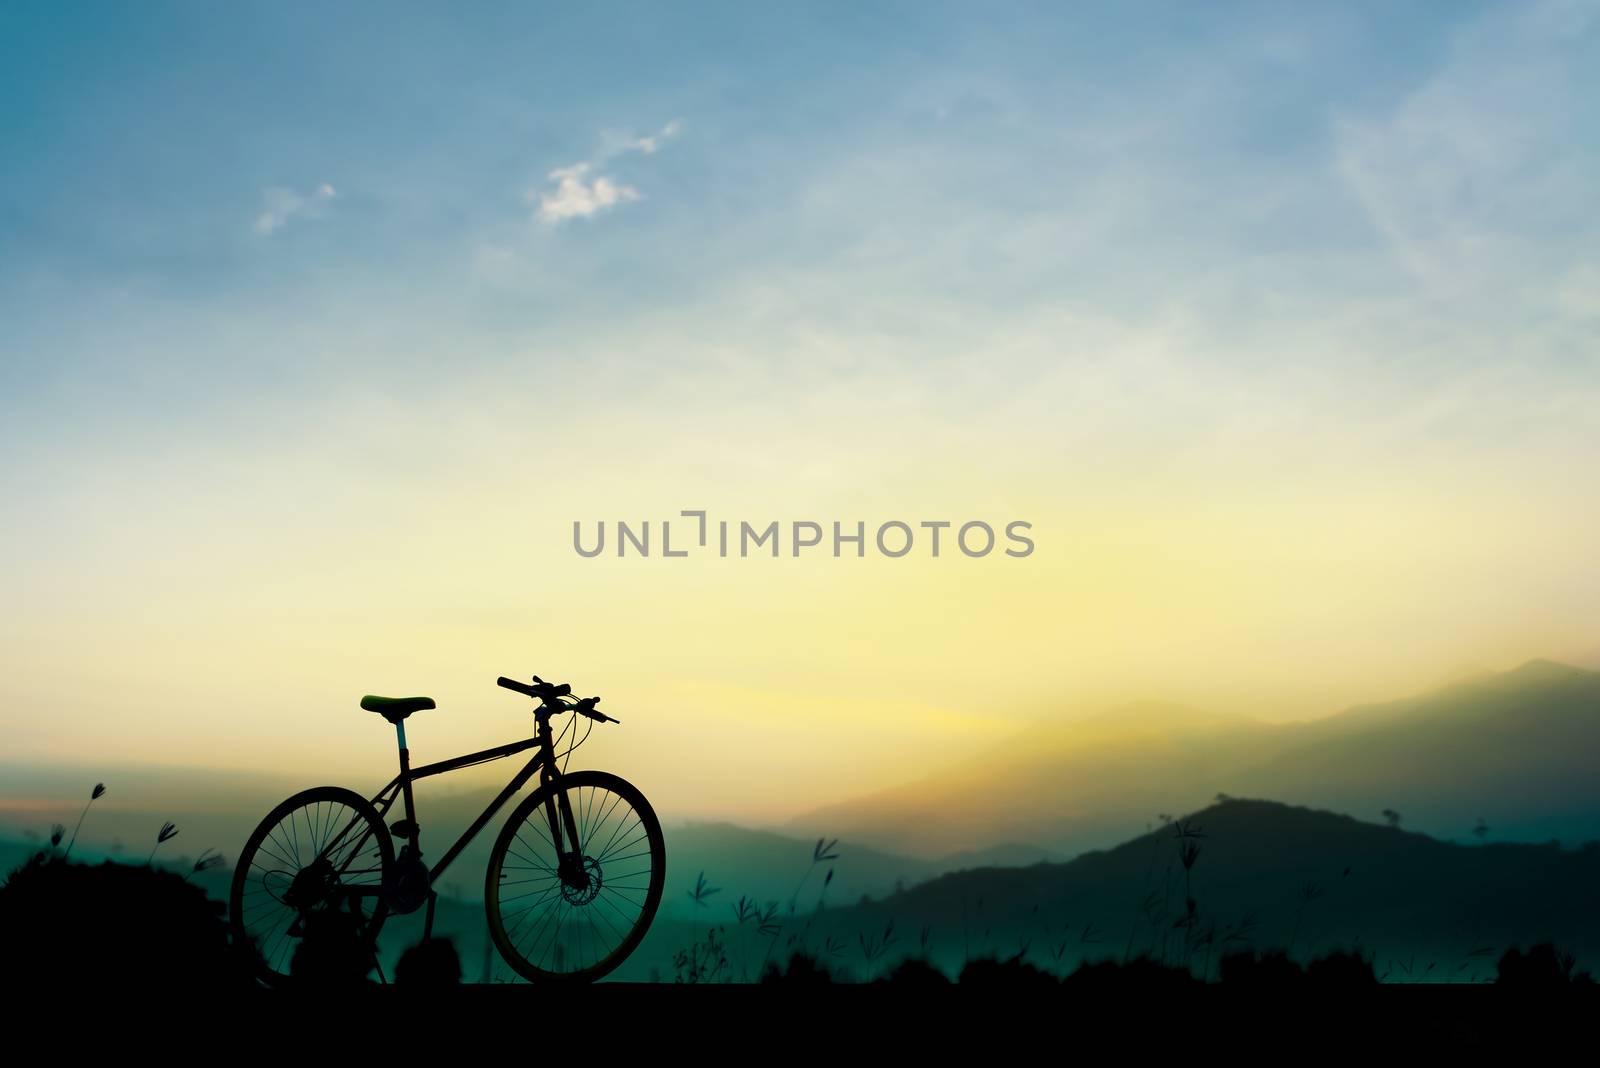 Sunset silhouette and bicycle on beautiful sky by anatskwong